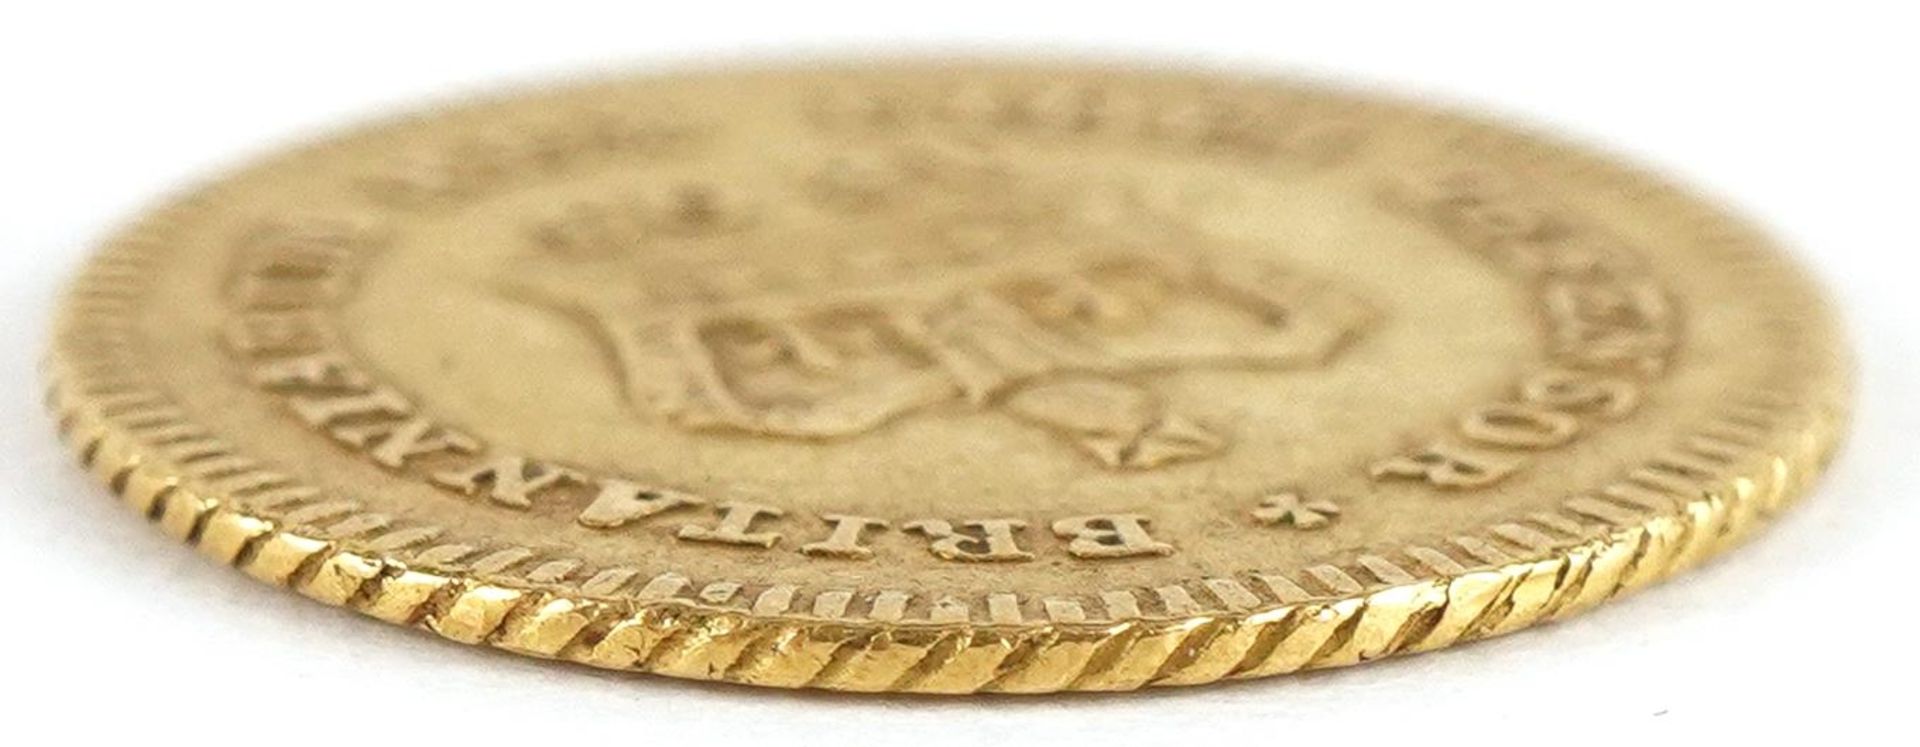 George III 1803 gold 1/3 guinea : For further information on this lot please visit www. - Image 3 of 3